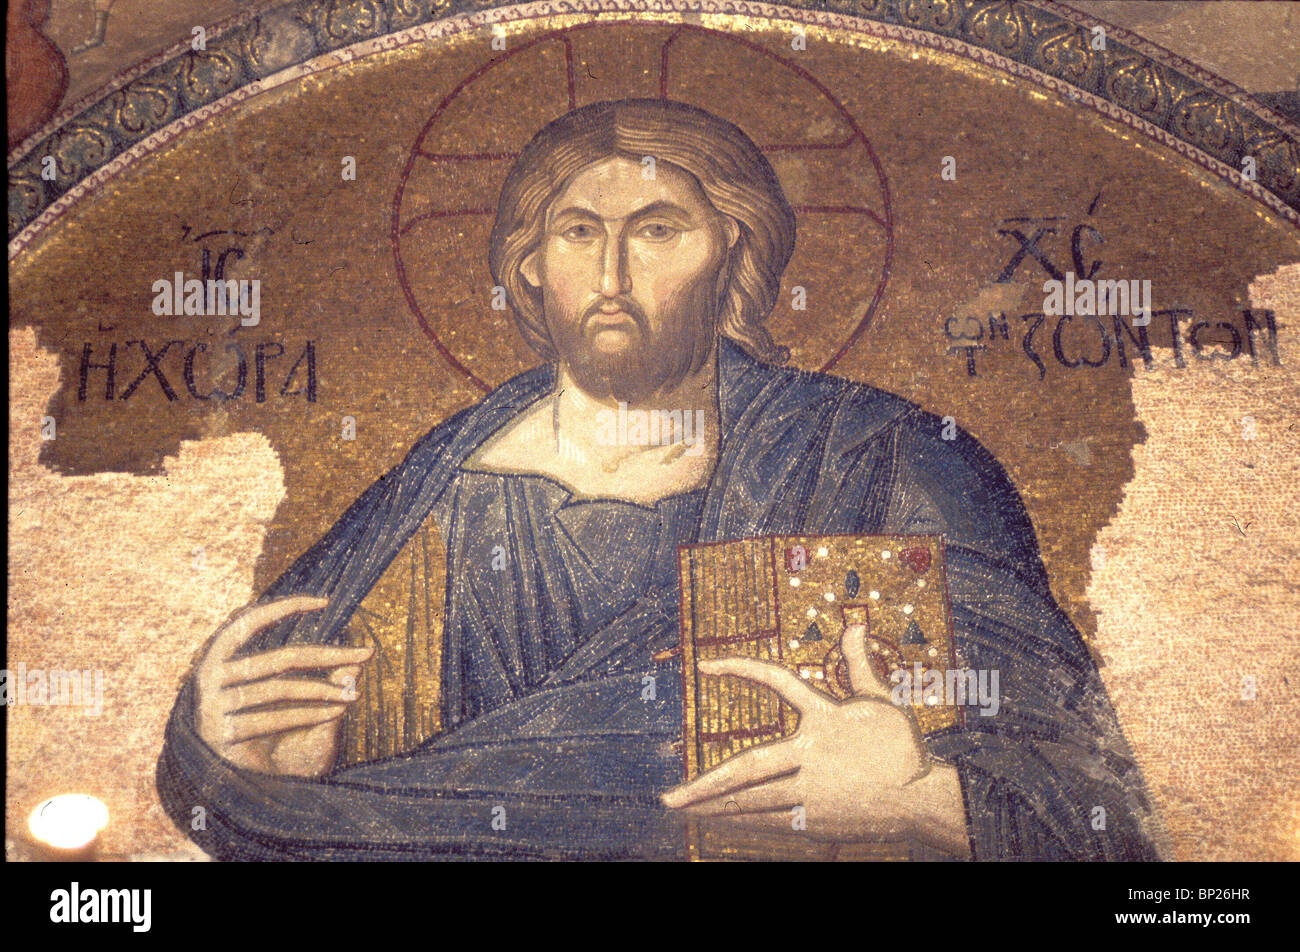 1105. JESUS CHRIST, 15TH. C. MOSAIC FROM THE BYZANTINE CHURCH CHORA IN ISTAMBUL Stock Photo